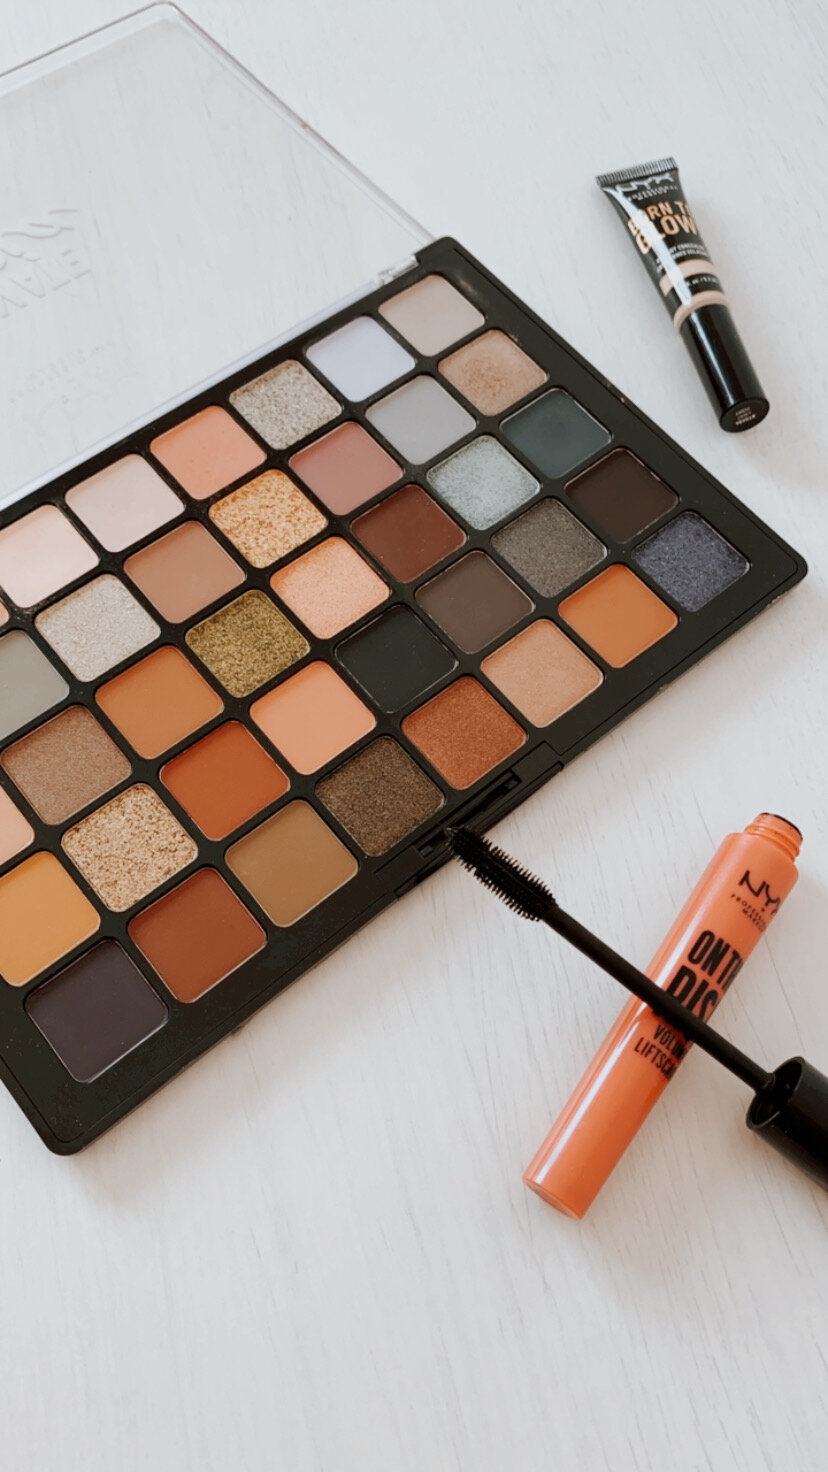 Cruelty-Free makeup brands you should know — The